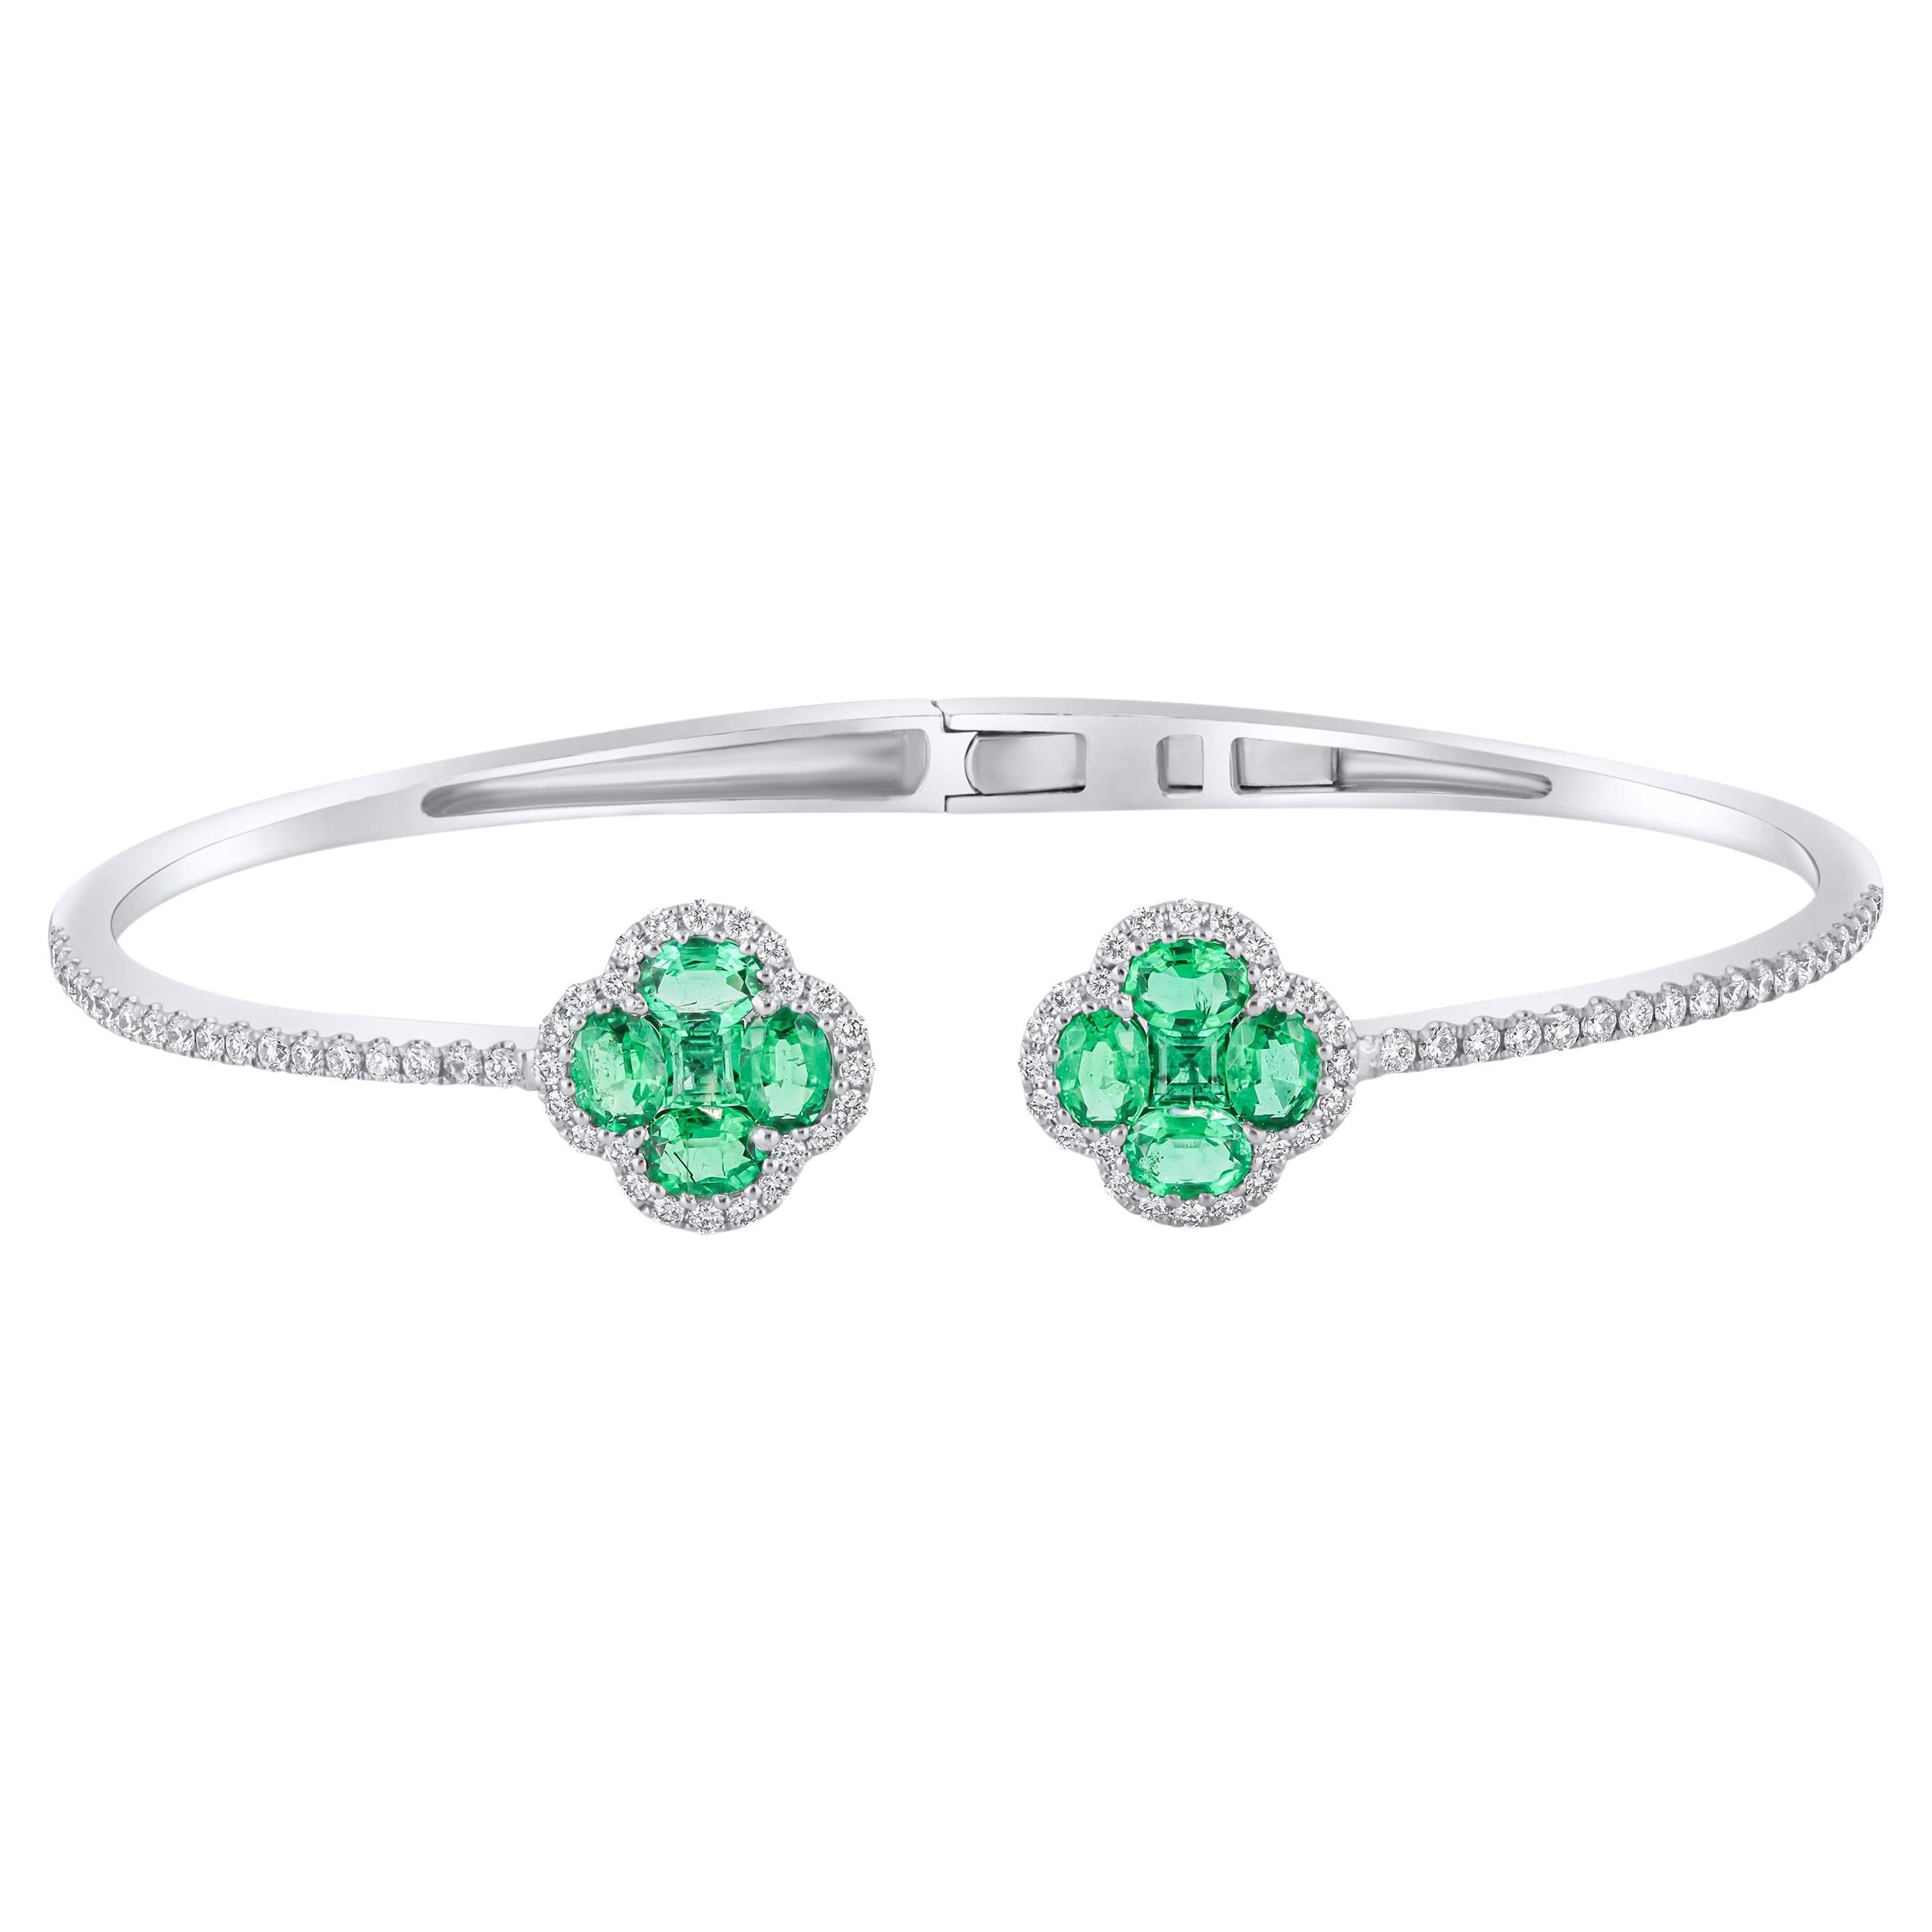 1.33 Carat Emerald Clover and Diamond Bangle in 18k White Gold